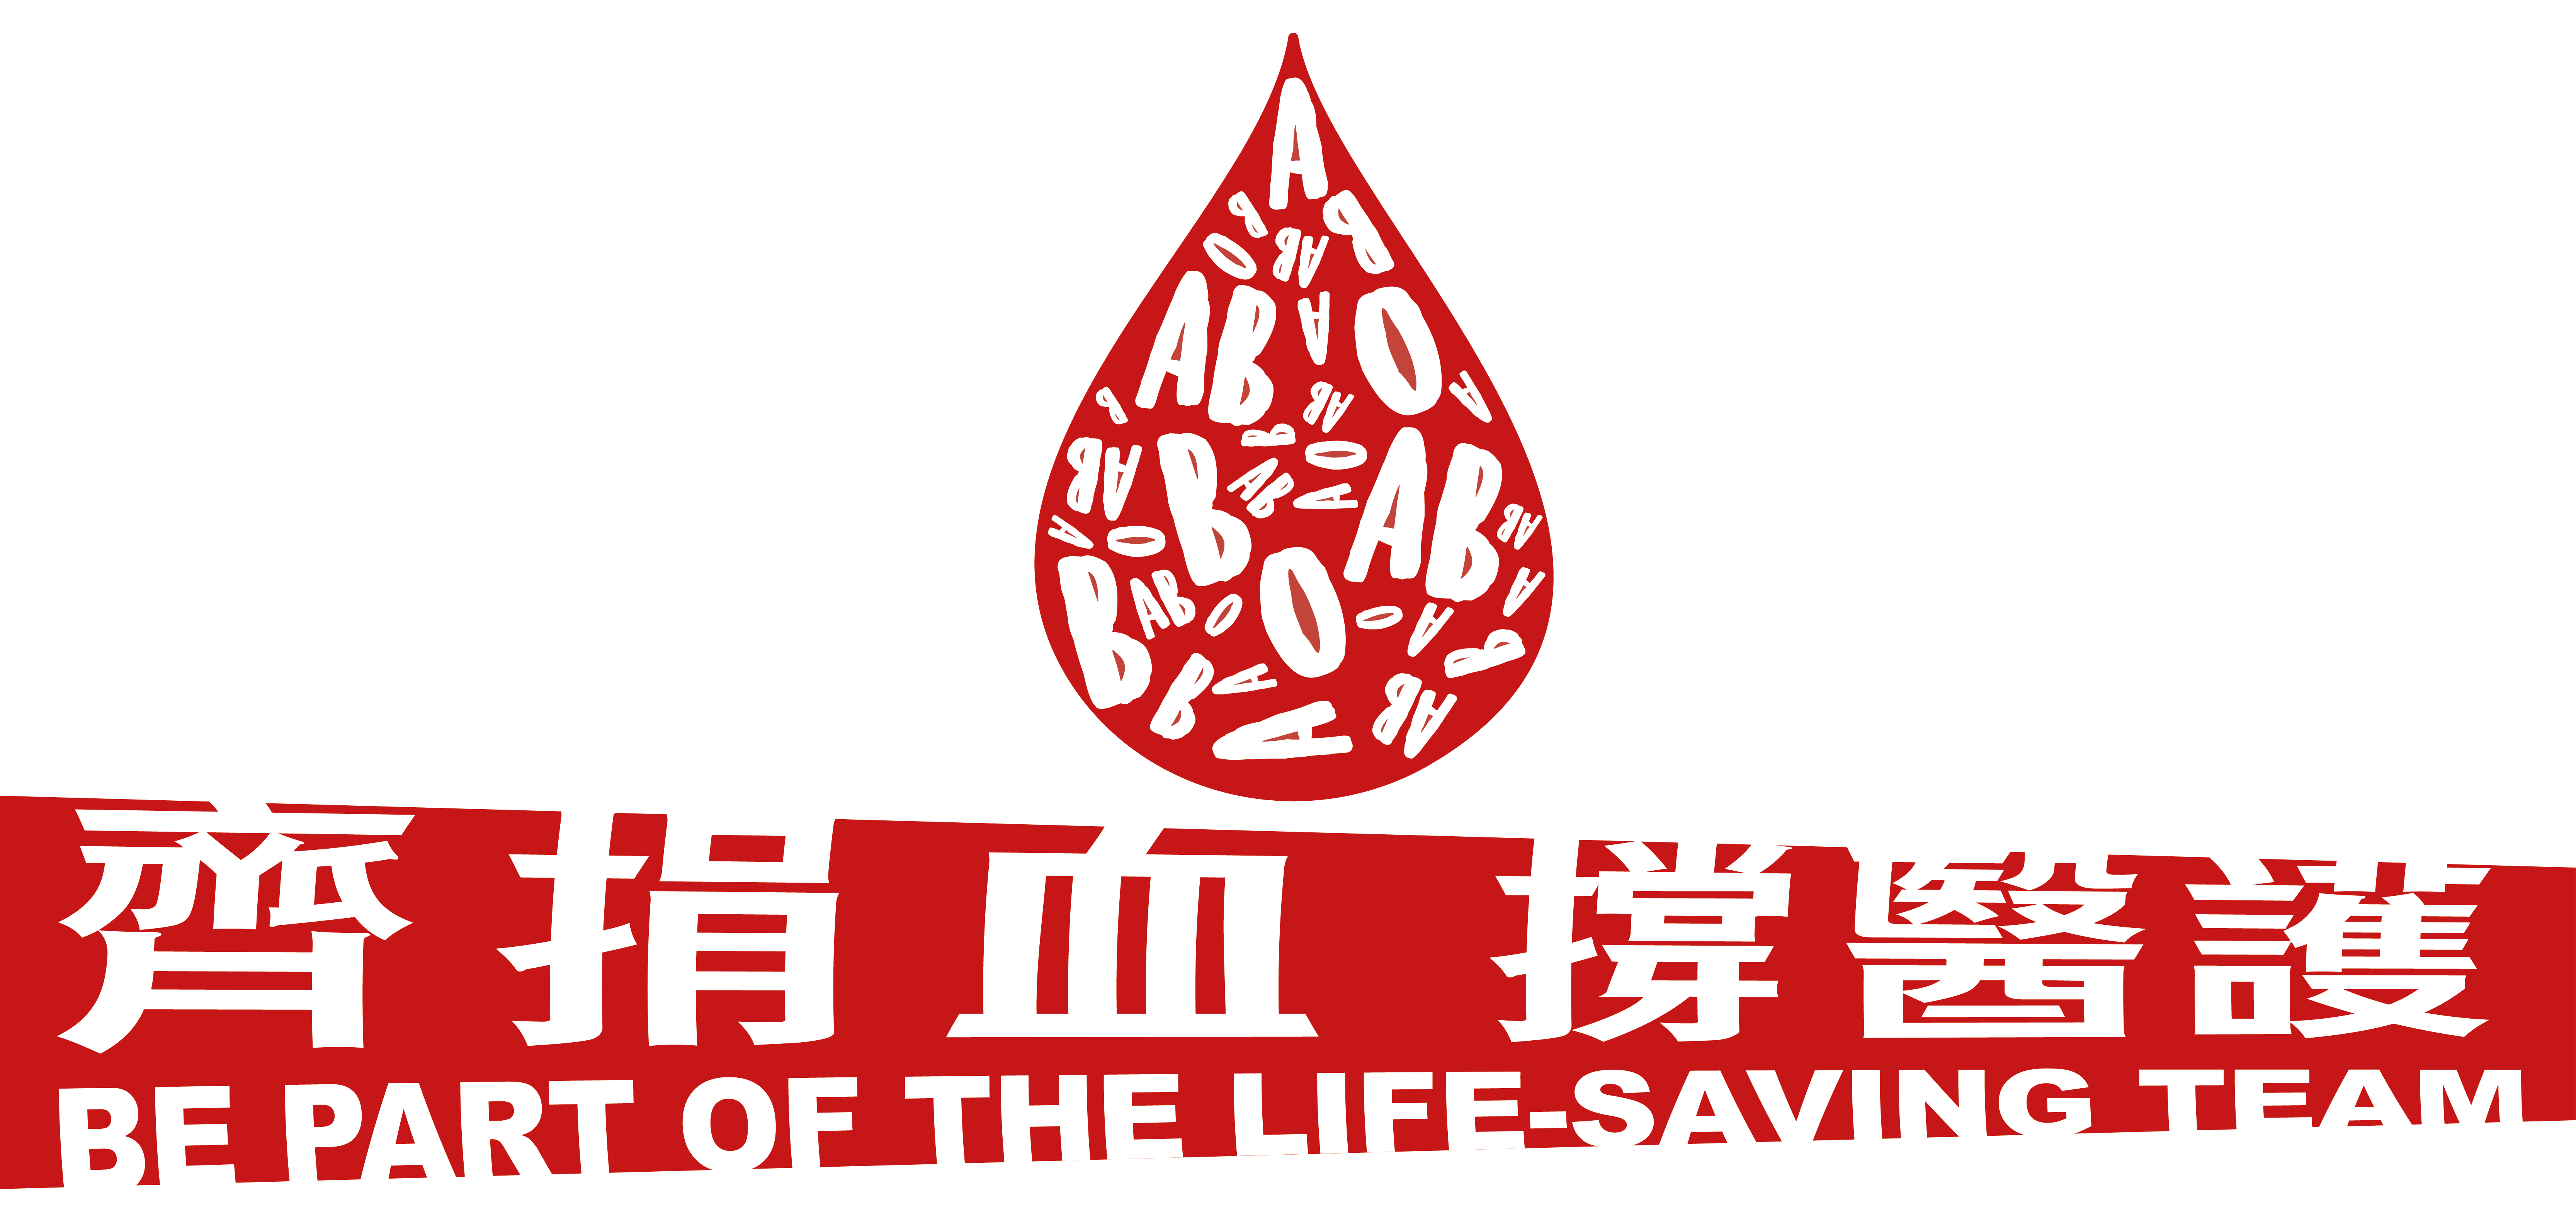 Image: Be part of the life-saving team